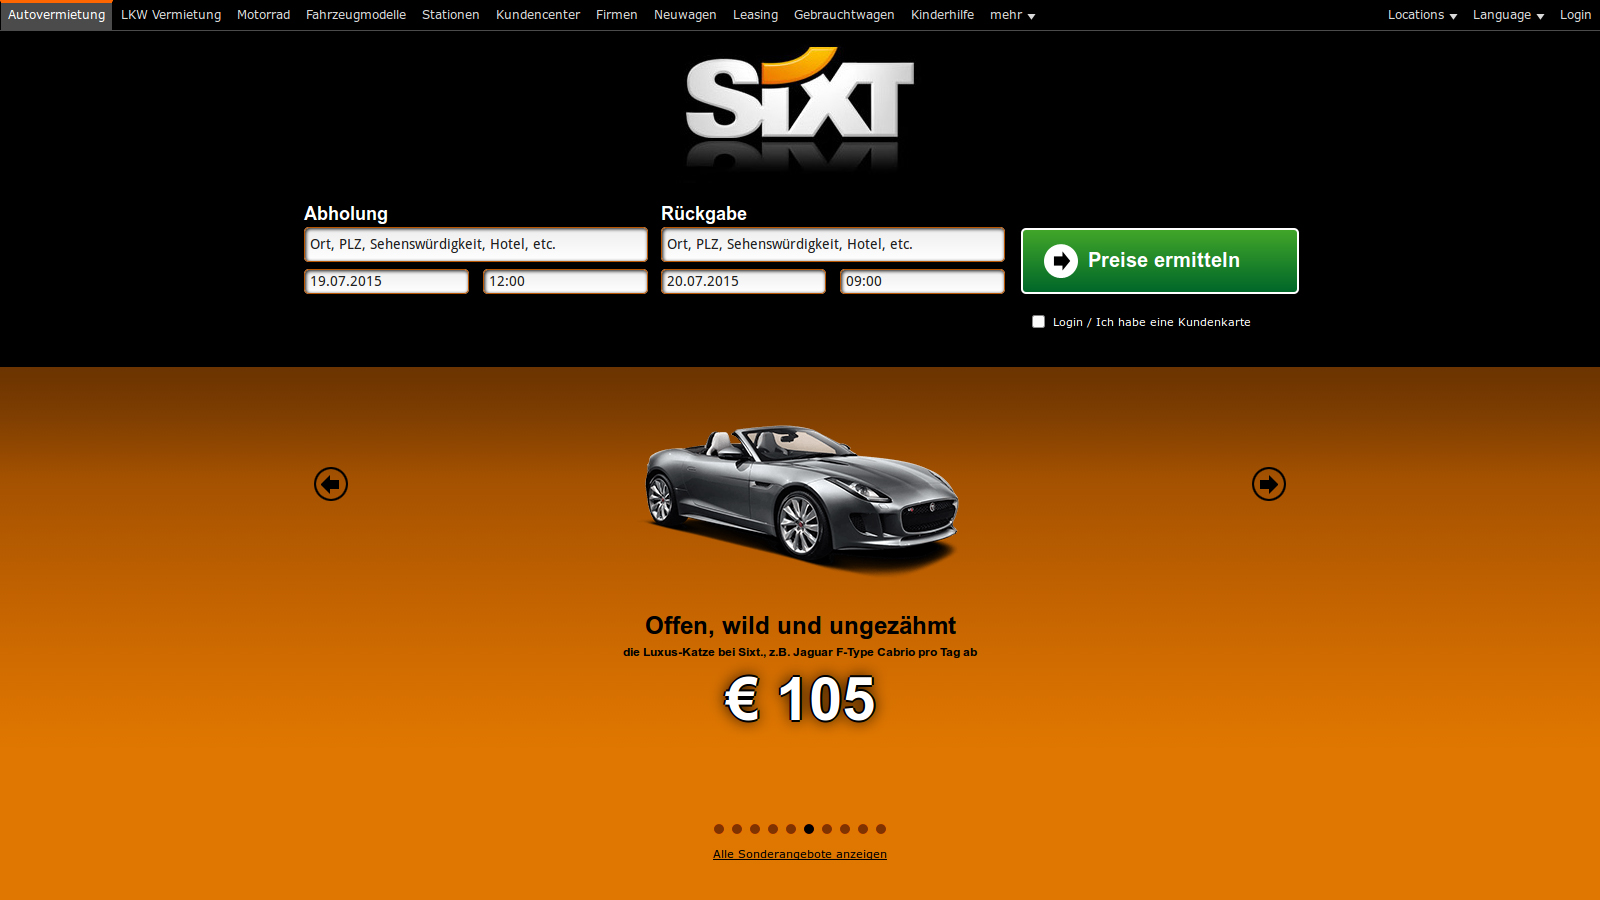 Revision of the MySixt Online Customer Center